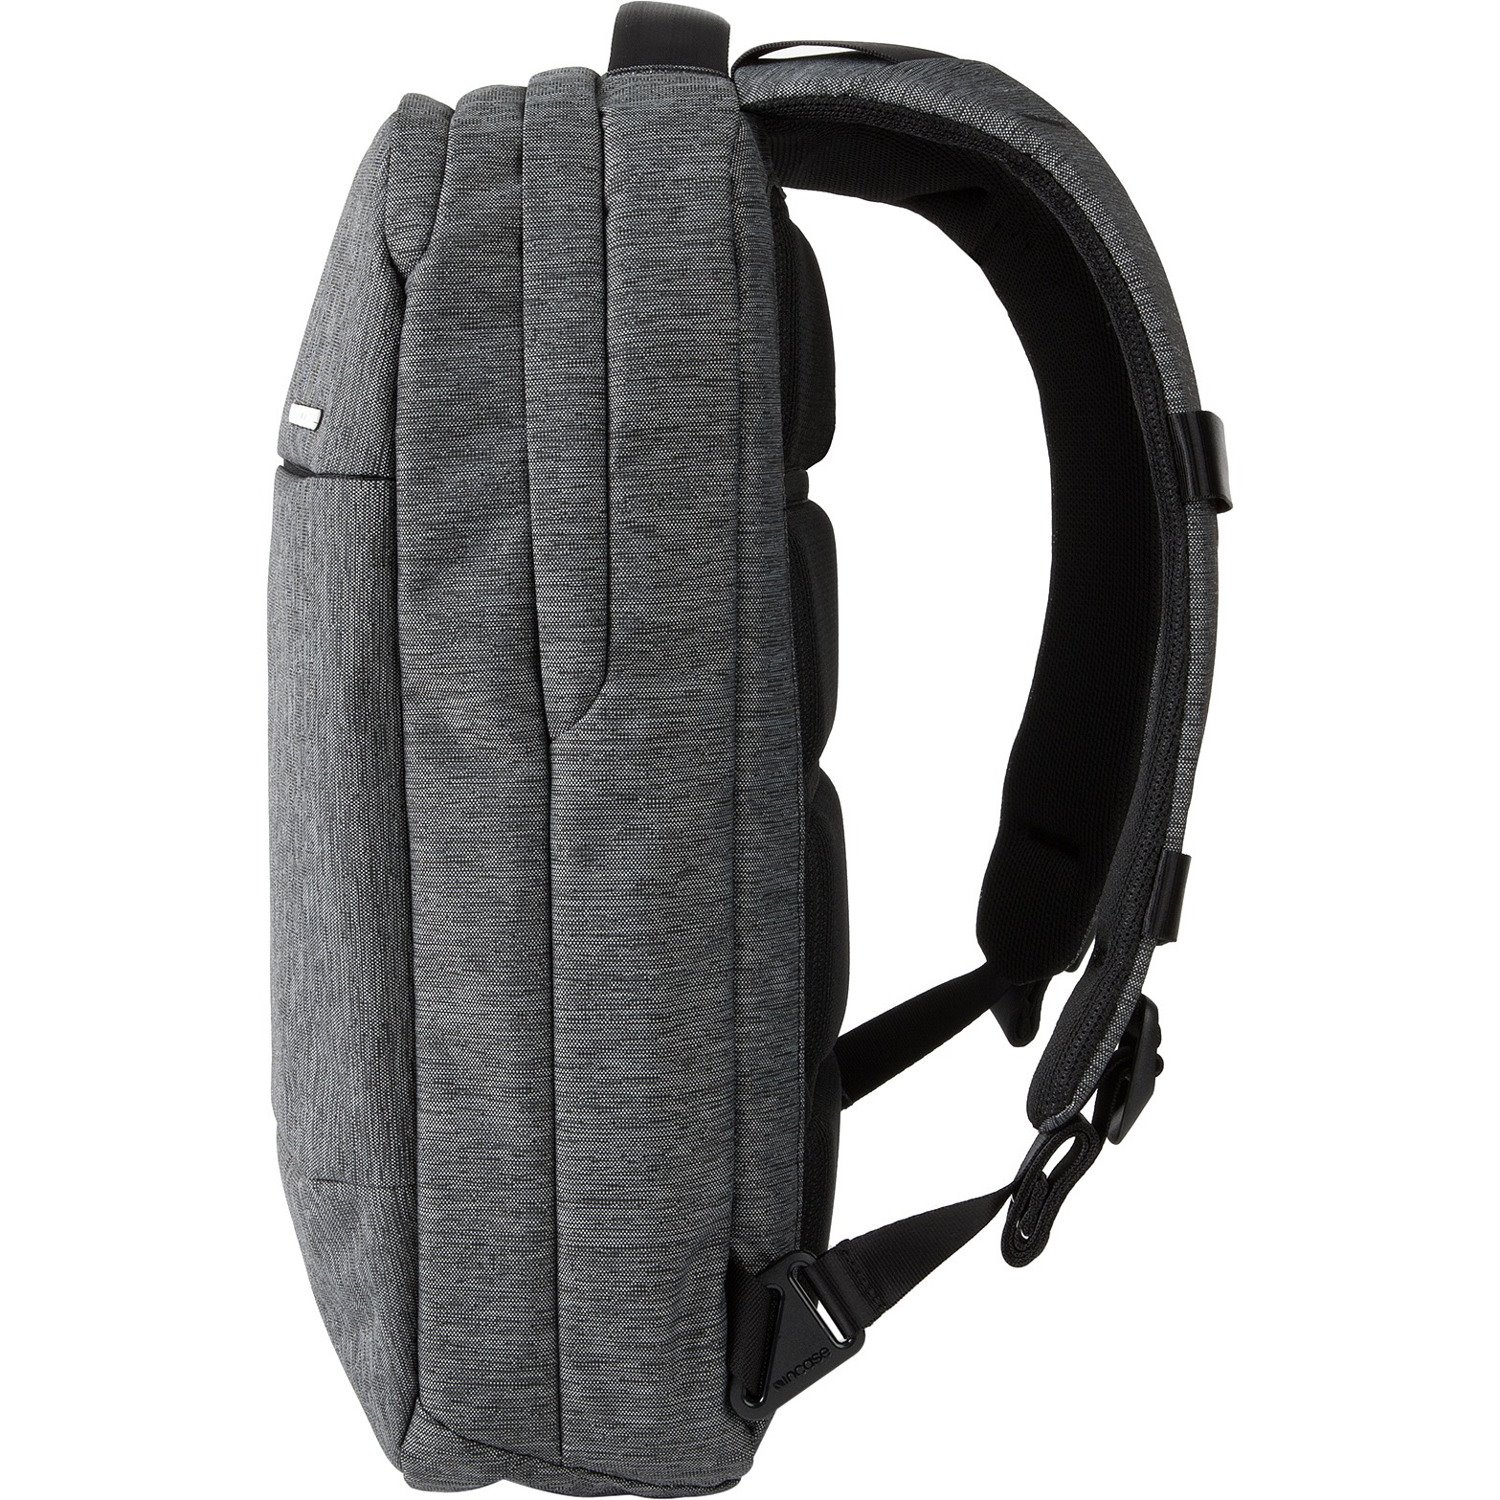 Incase City Compact Backpack - Heather Black